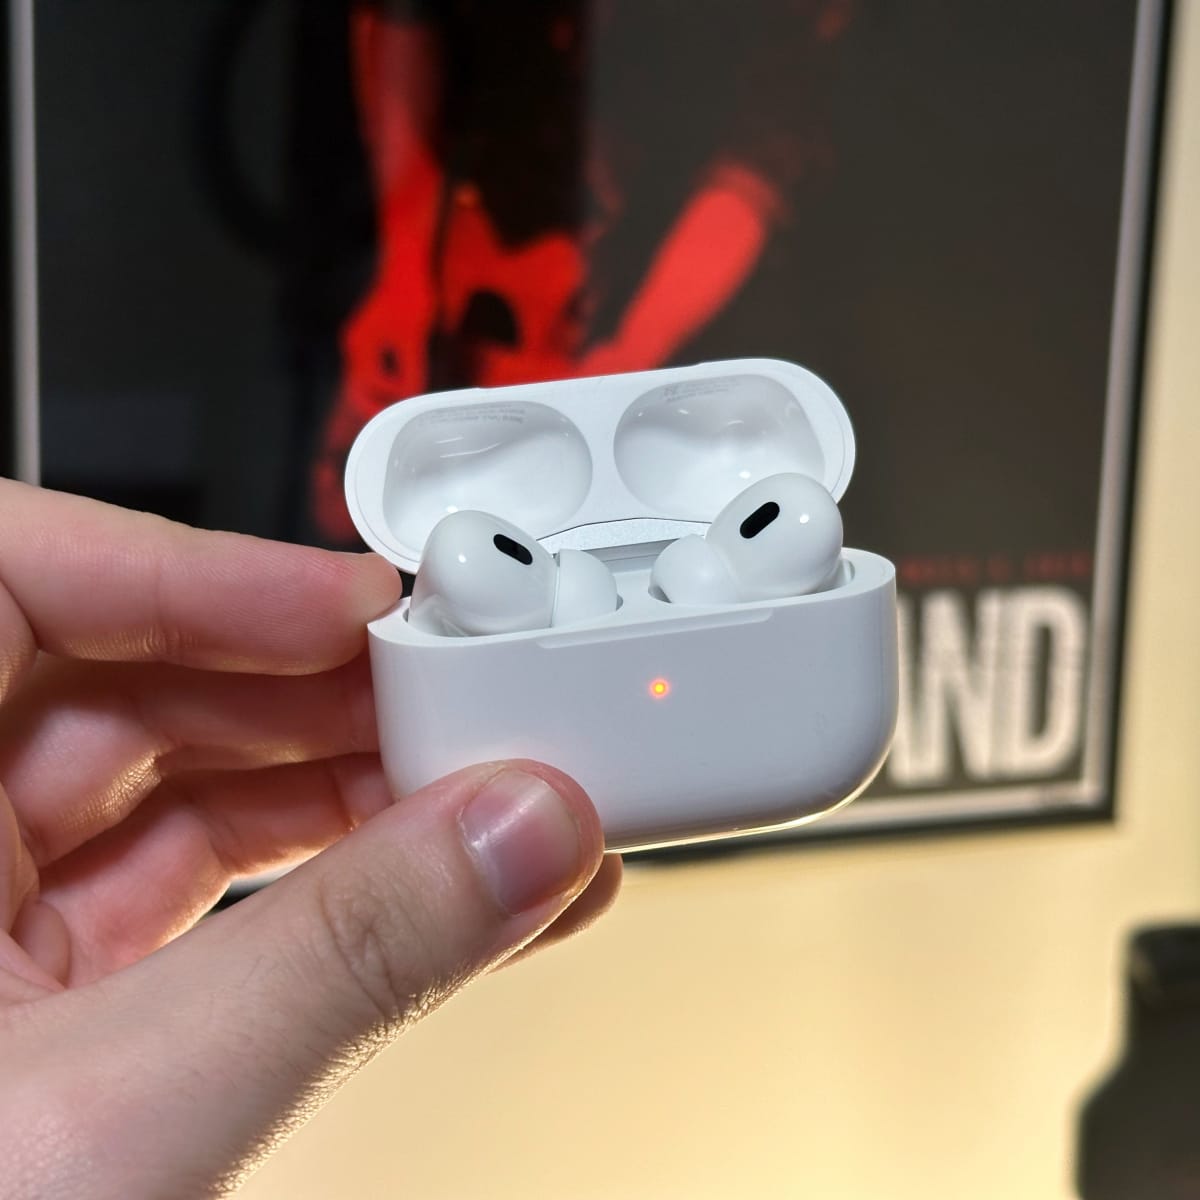 Apple's new AirPods Pro with USB-C charging case are already $50